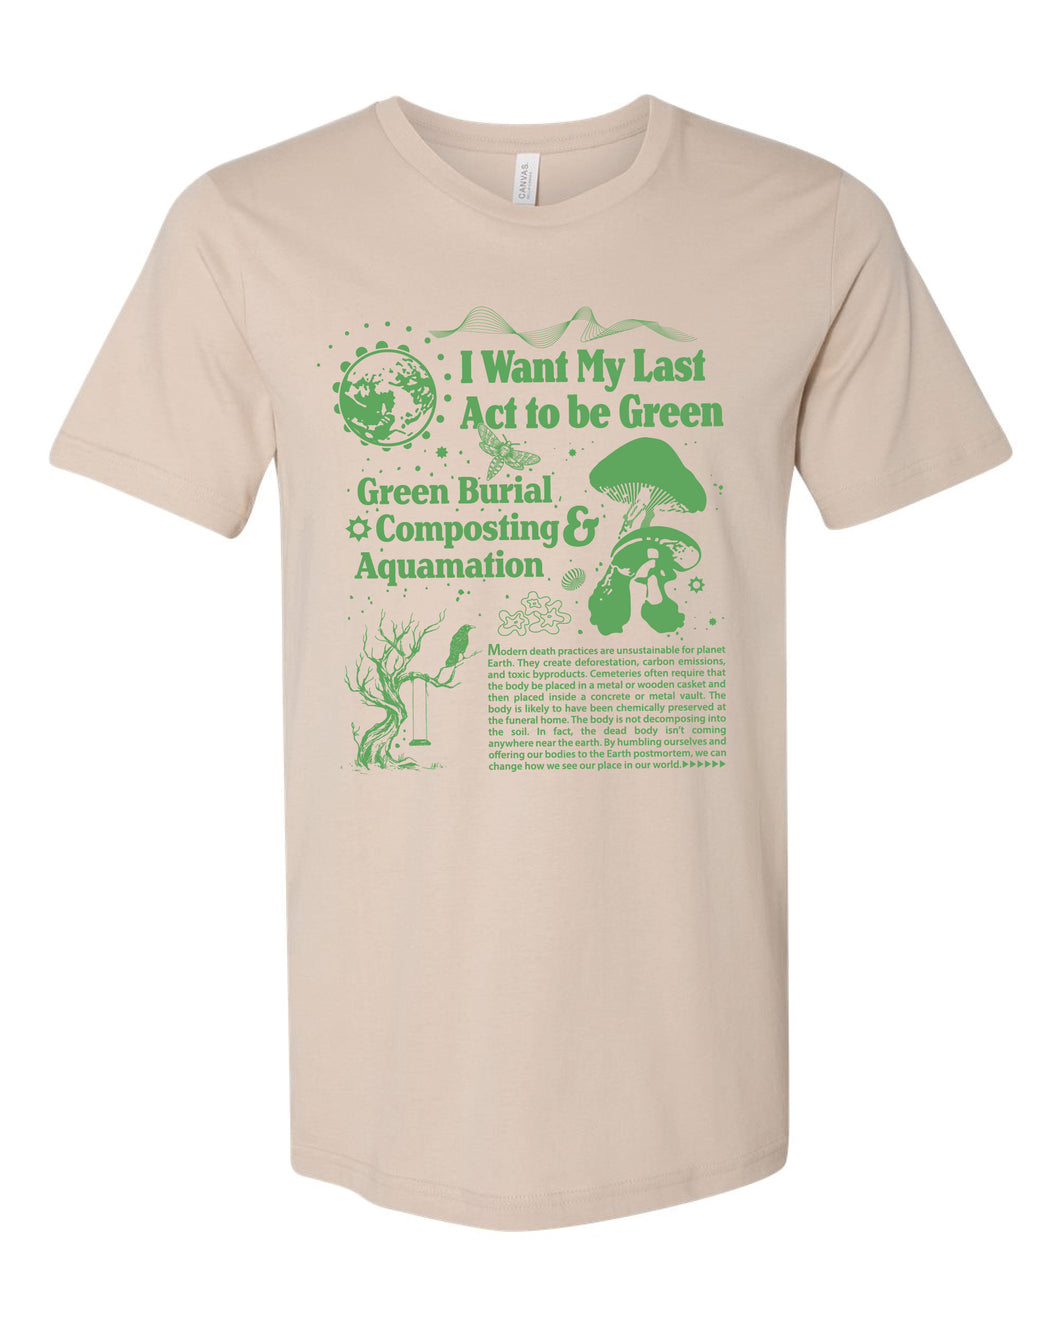 I Want My Last Act to Be Green Tee